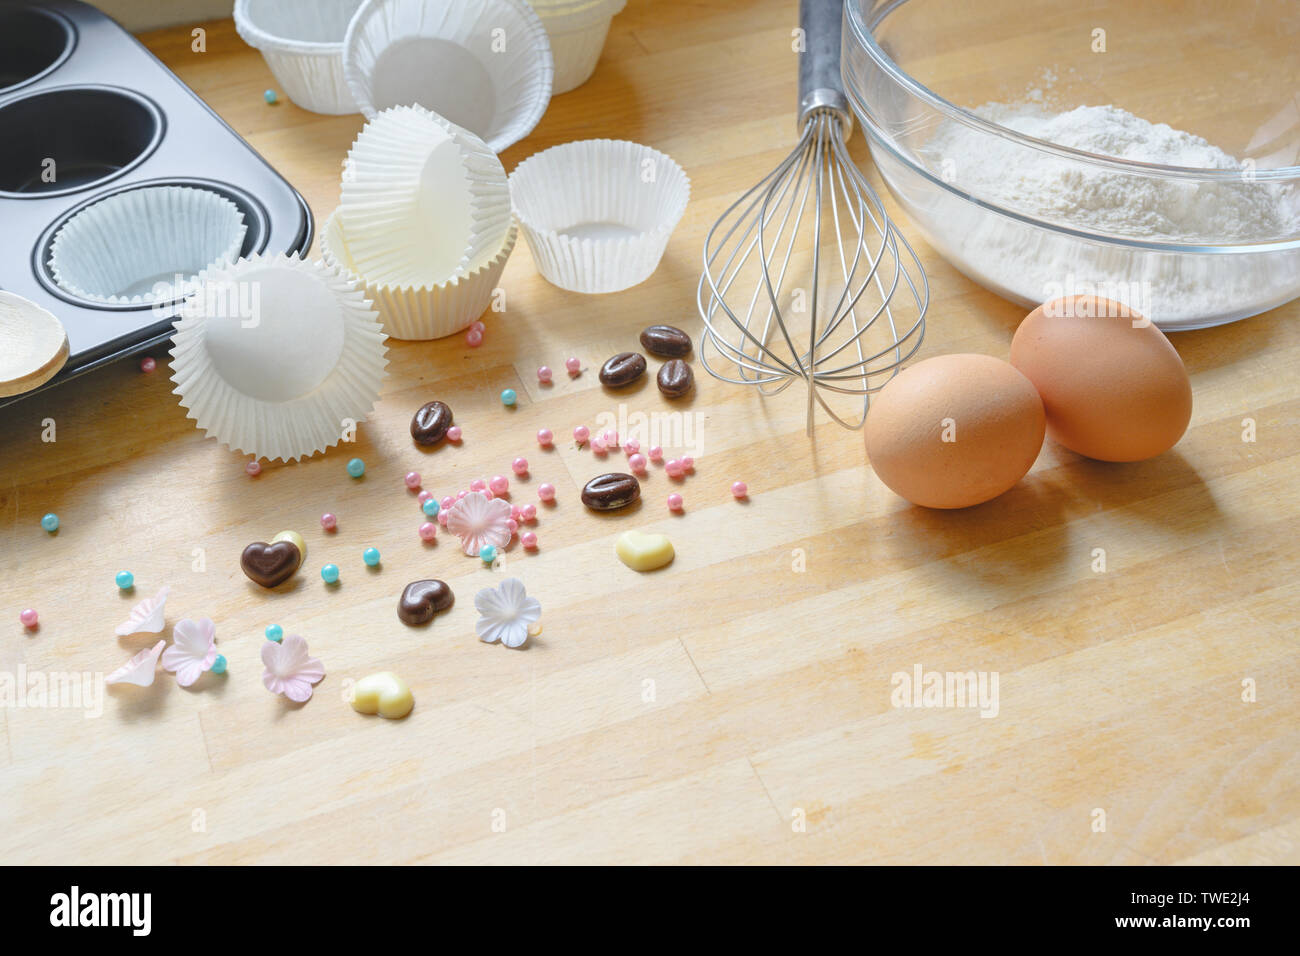 making cupcakes, tools and ingredients on a wooden kitchen board, copy space, selected focus Stock Photo